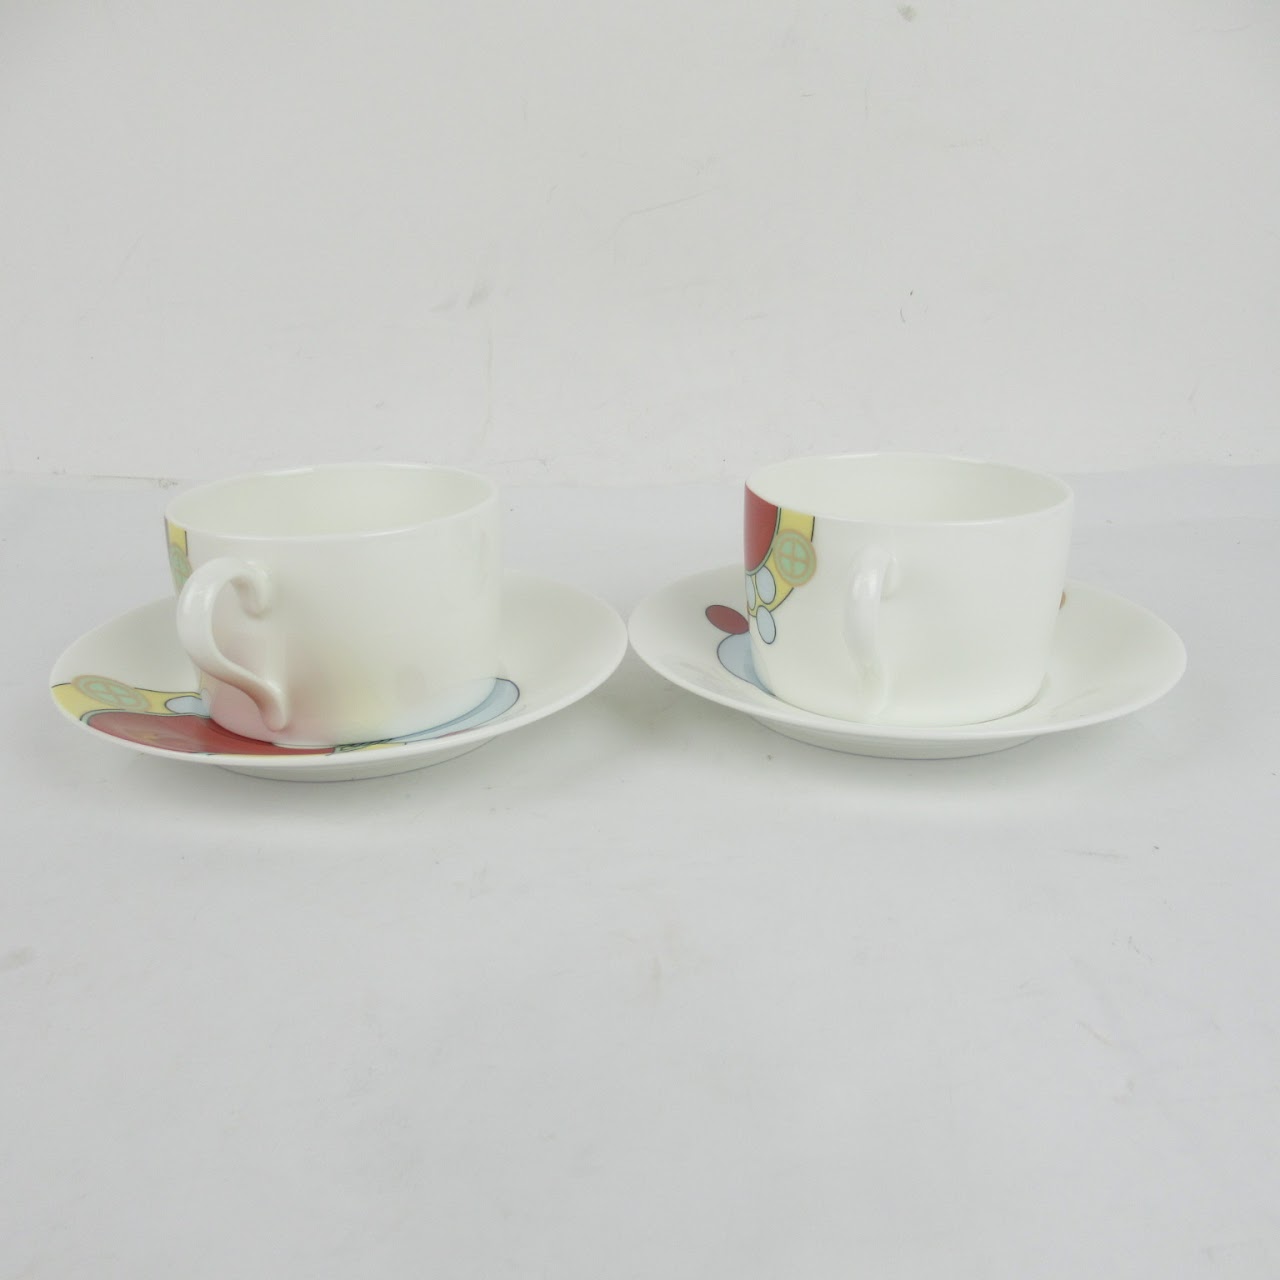 Frank Lloyd Wright Noritake Imperial Hotel Cup & Saucer Pair